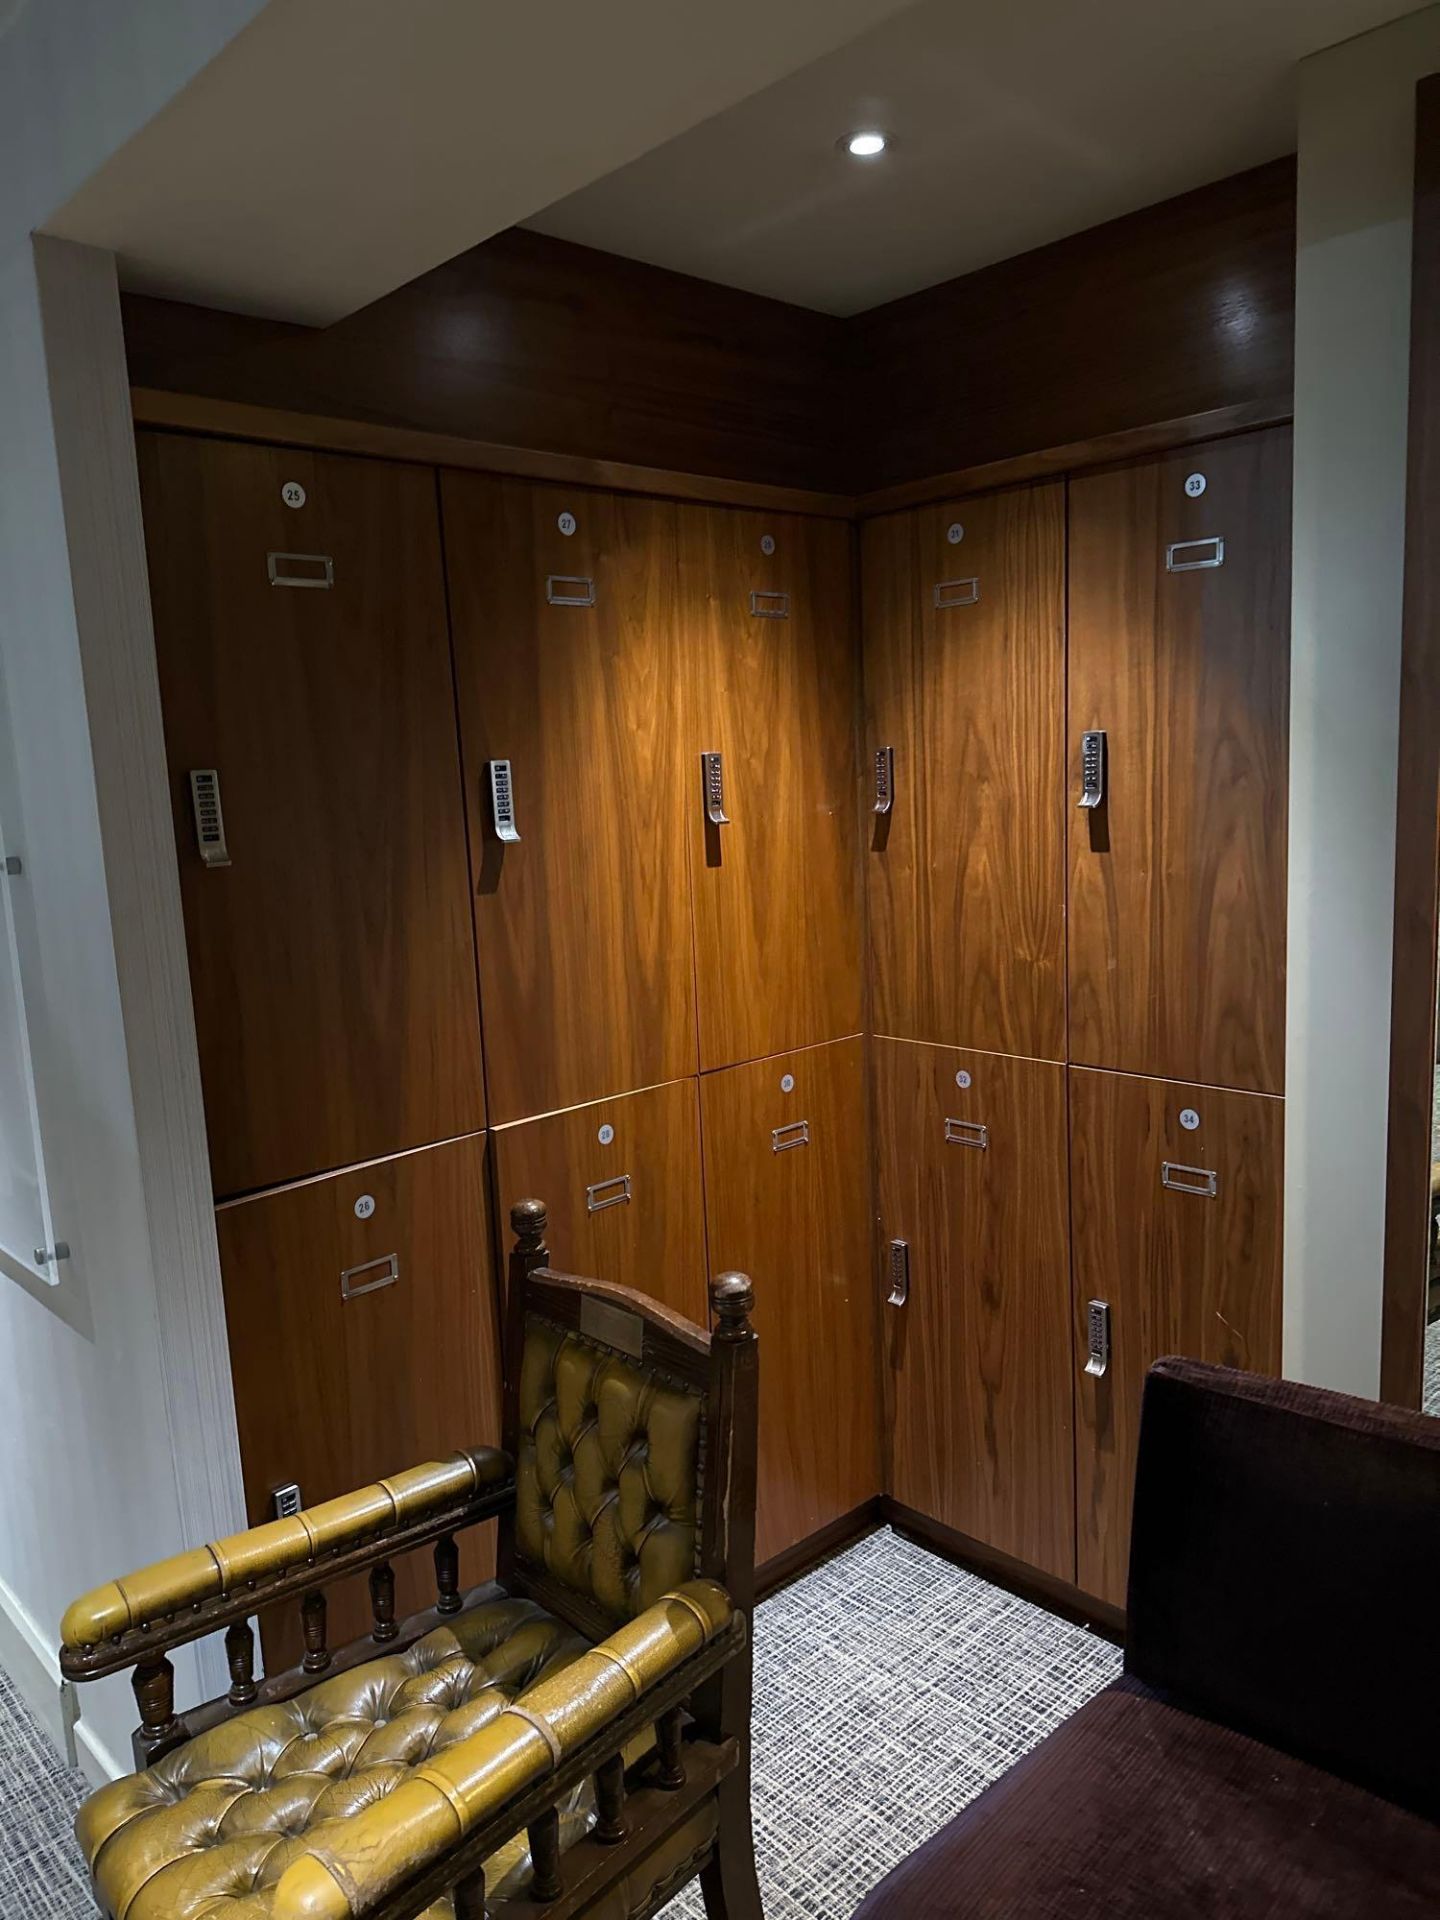 74 x wooden locker cabinets internally fitted with rail and shoe shelf internally measure 41 x 48 - Image 5 of 8